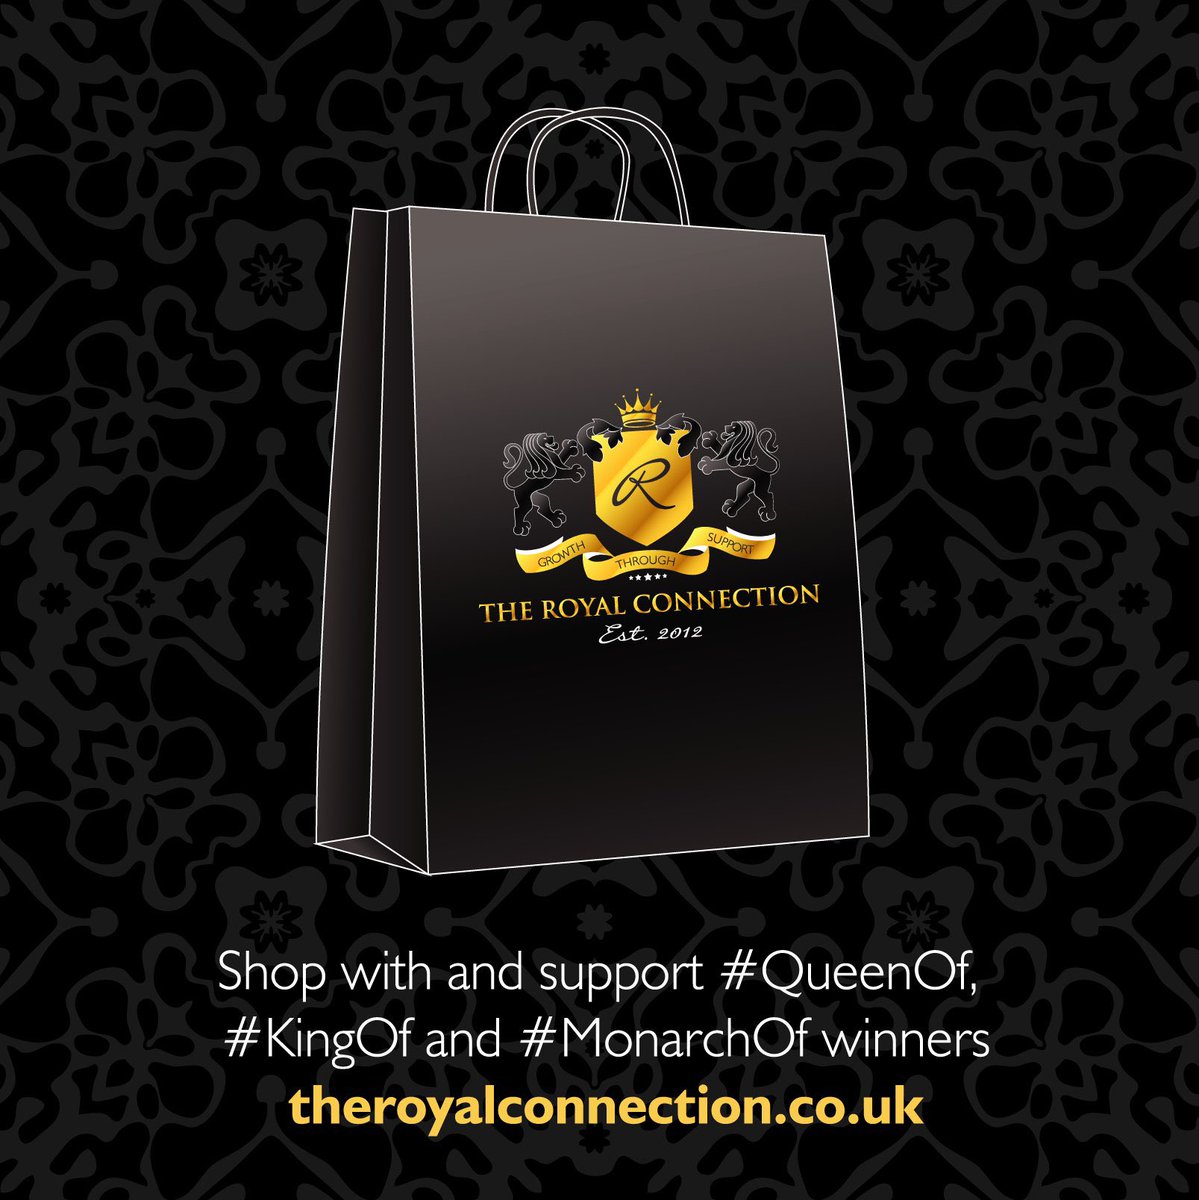 Explore the possibilities in #Stockport and check out theroyalconnection.co.uk to discover what’s on offer from #QueenOf, #KingOf & #MonarchOf winners across the town! :-) #Cheshire #SmallBusiness #Male #Entrepreneur #FemaleEntrepreneur #LGBTQ #PromoteStockport